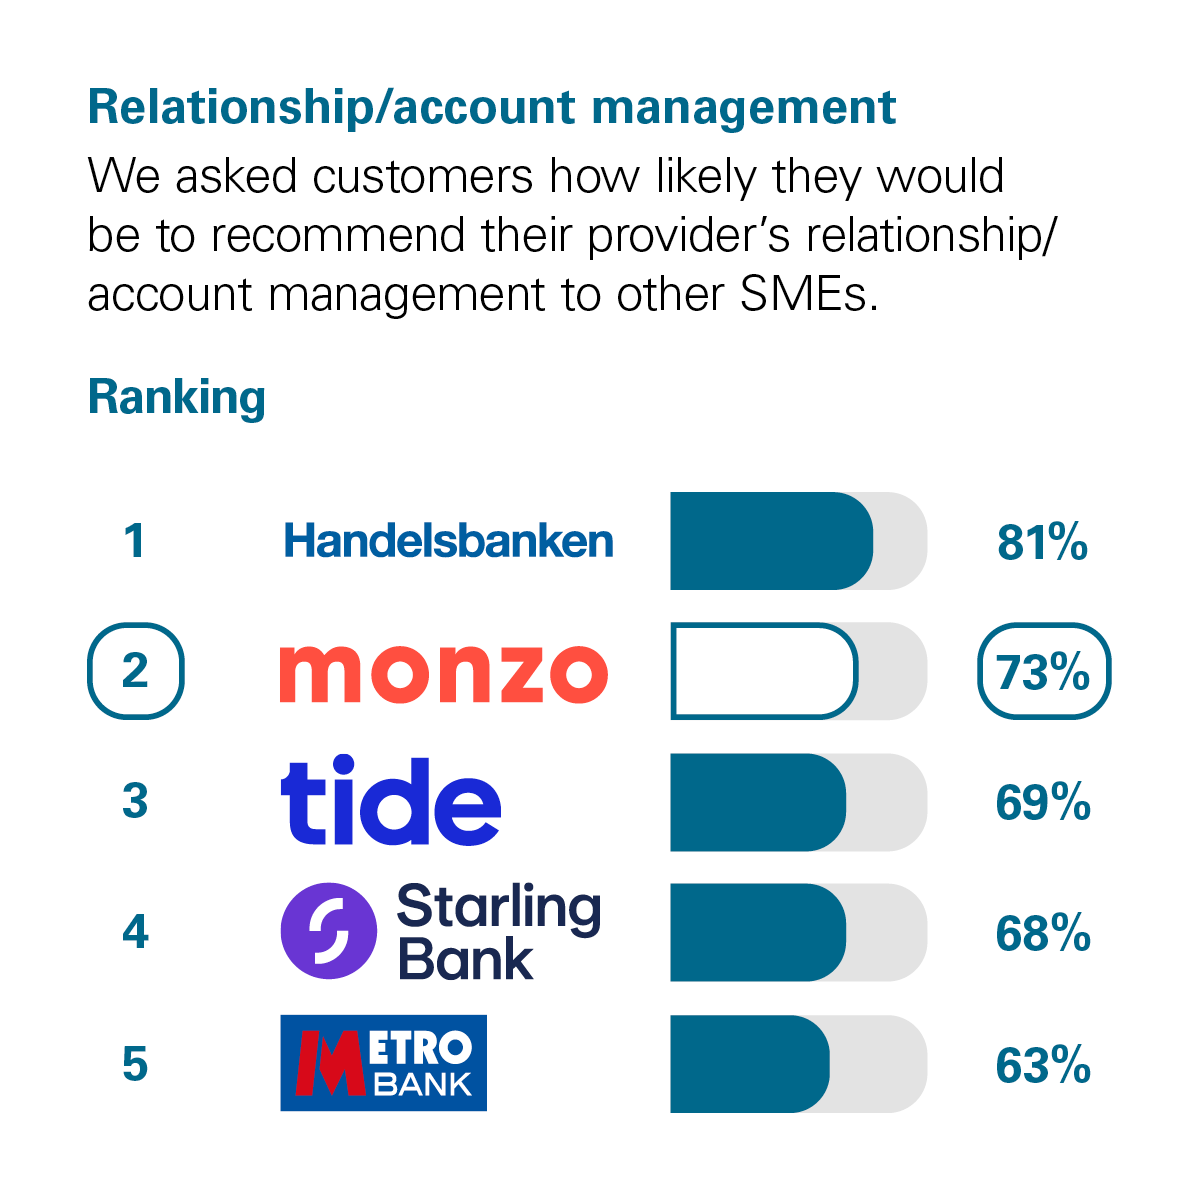 Graph showing the results of the CMA scoring of UK banks in the Relationship/Account Management category. The CMA asked customers how likely they would be to recommend their provider's account management services to other small and medium-sized enterprises (SMEs*). The rankings with percentage scores are: 1st Handelsbanken with 81%. 2nd Monzo with 73%. 3rd Tide with 69%. 4th Starling Bank with 68%. 5th Metro Bank with 63%.